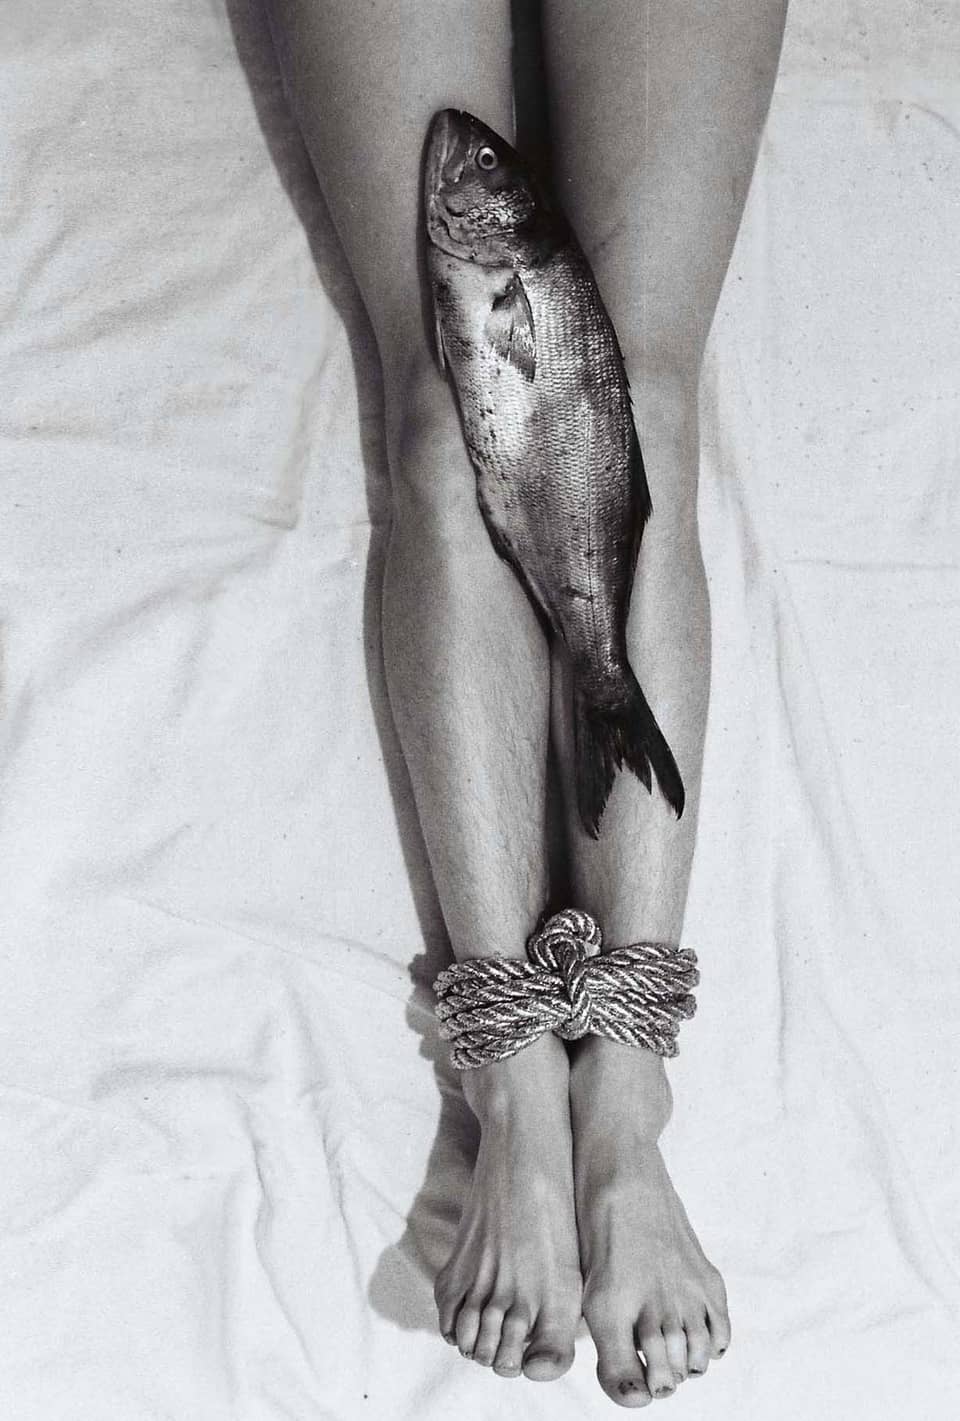 A pair of bare legs, bound at the ankles. A fish lies on the knees.